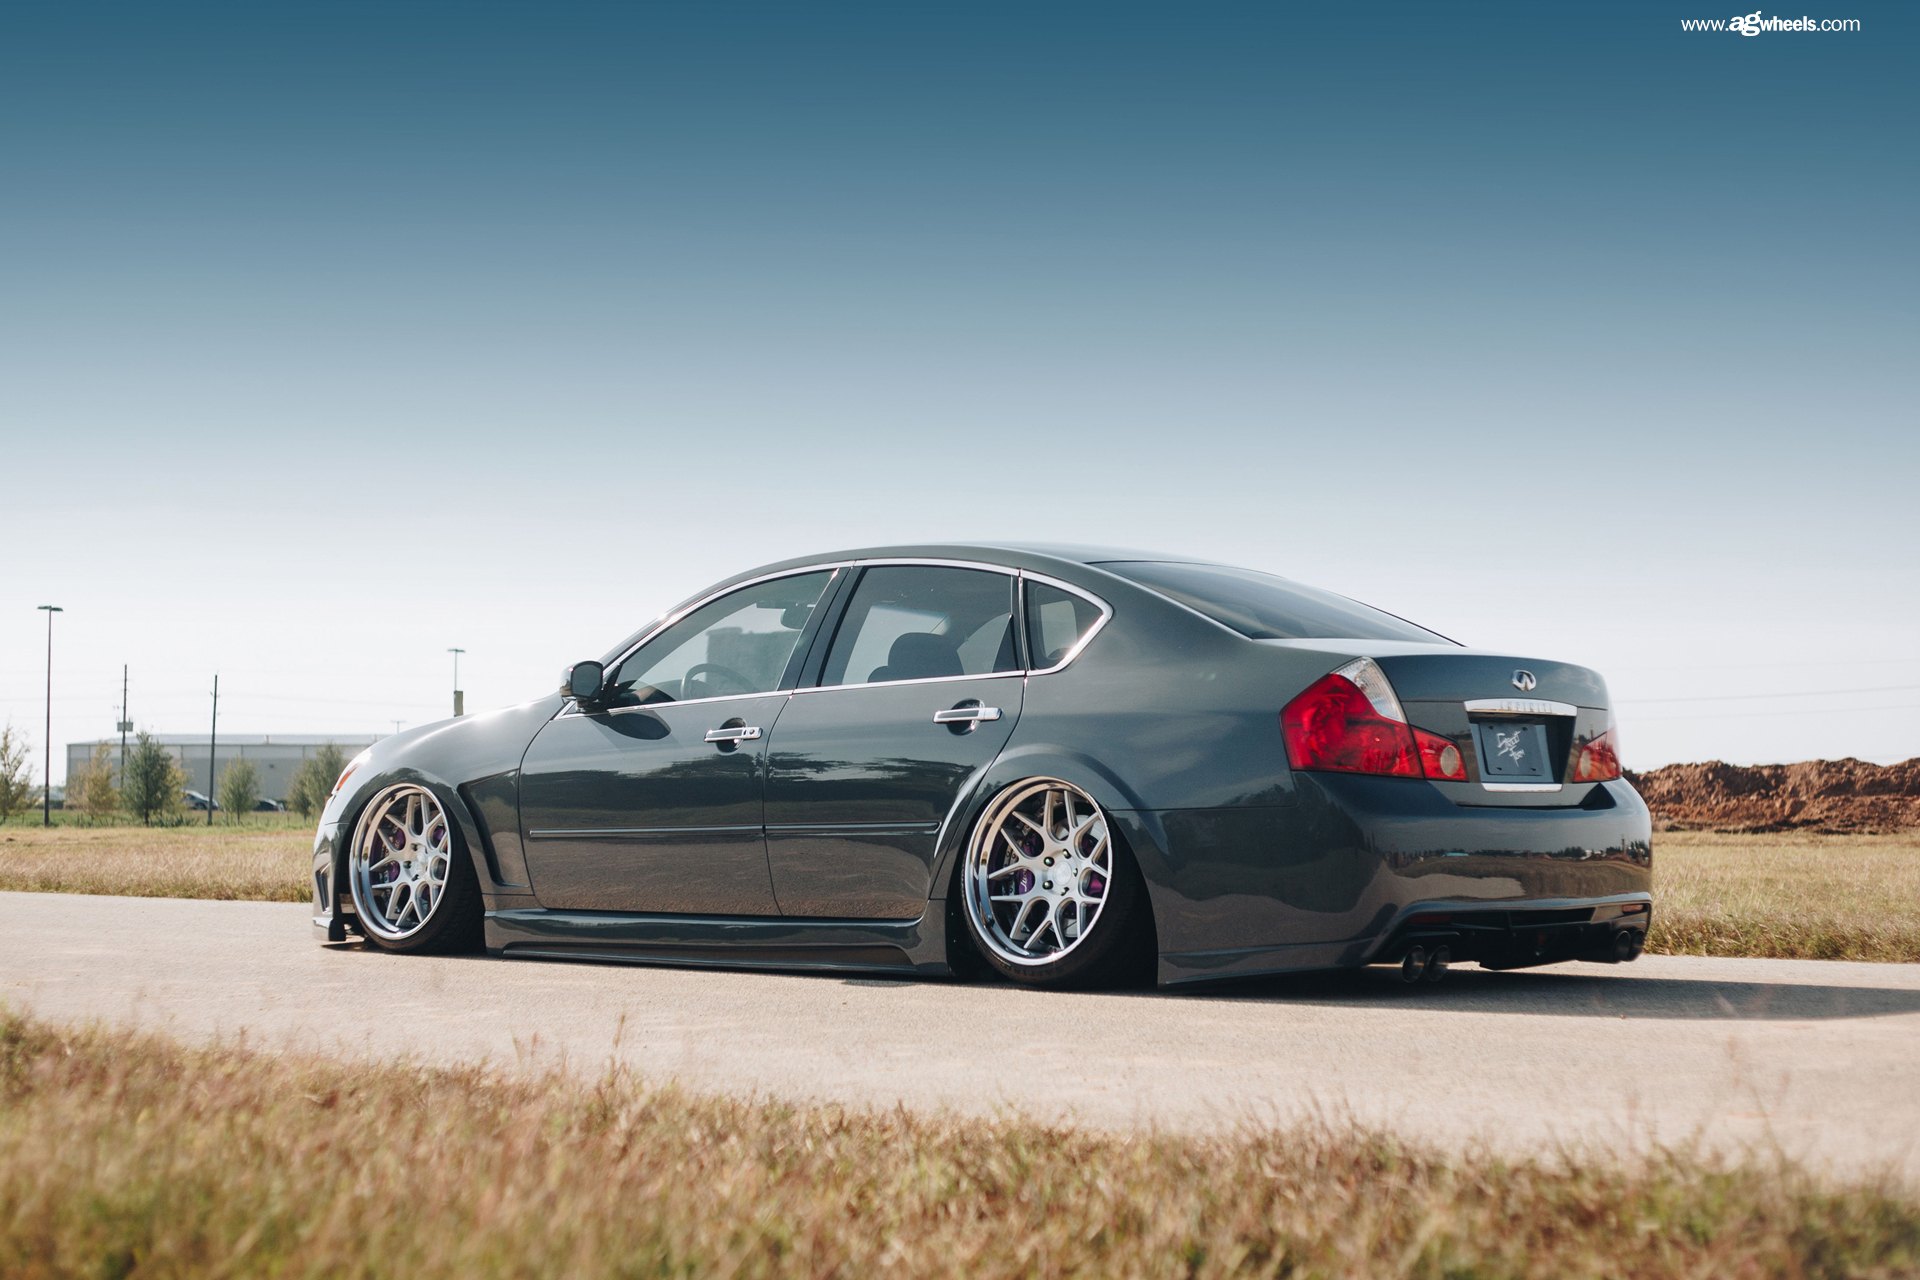 Aftermarket Side Skirts on Gray Stanced Infiniti M35 - Photo by Avant Garde Wheels